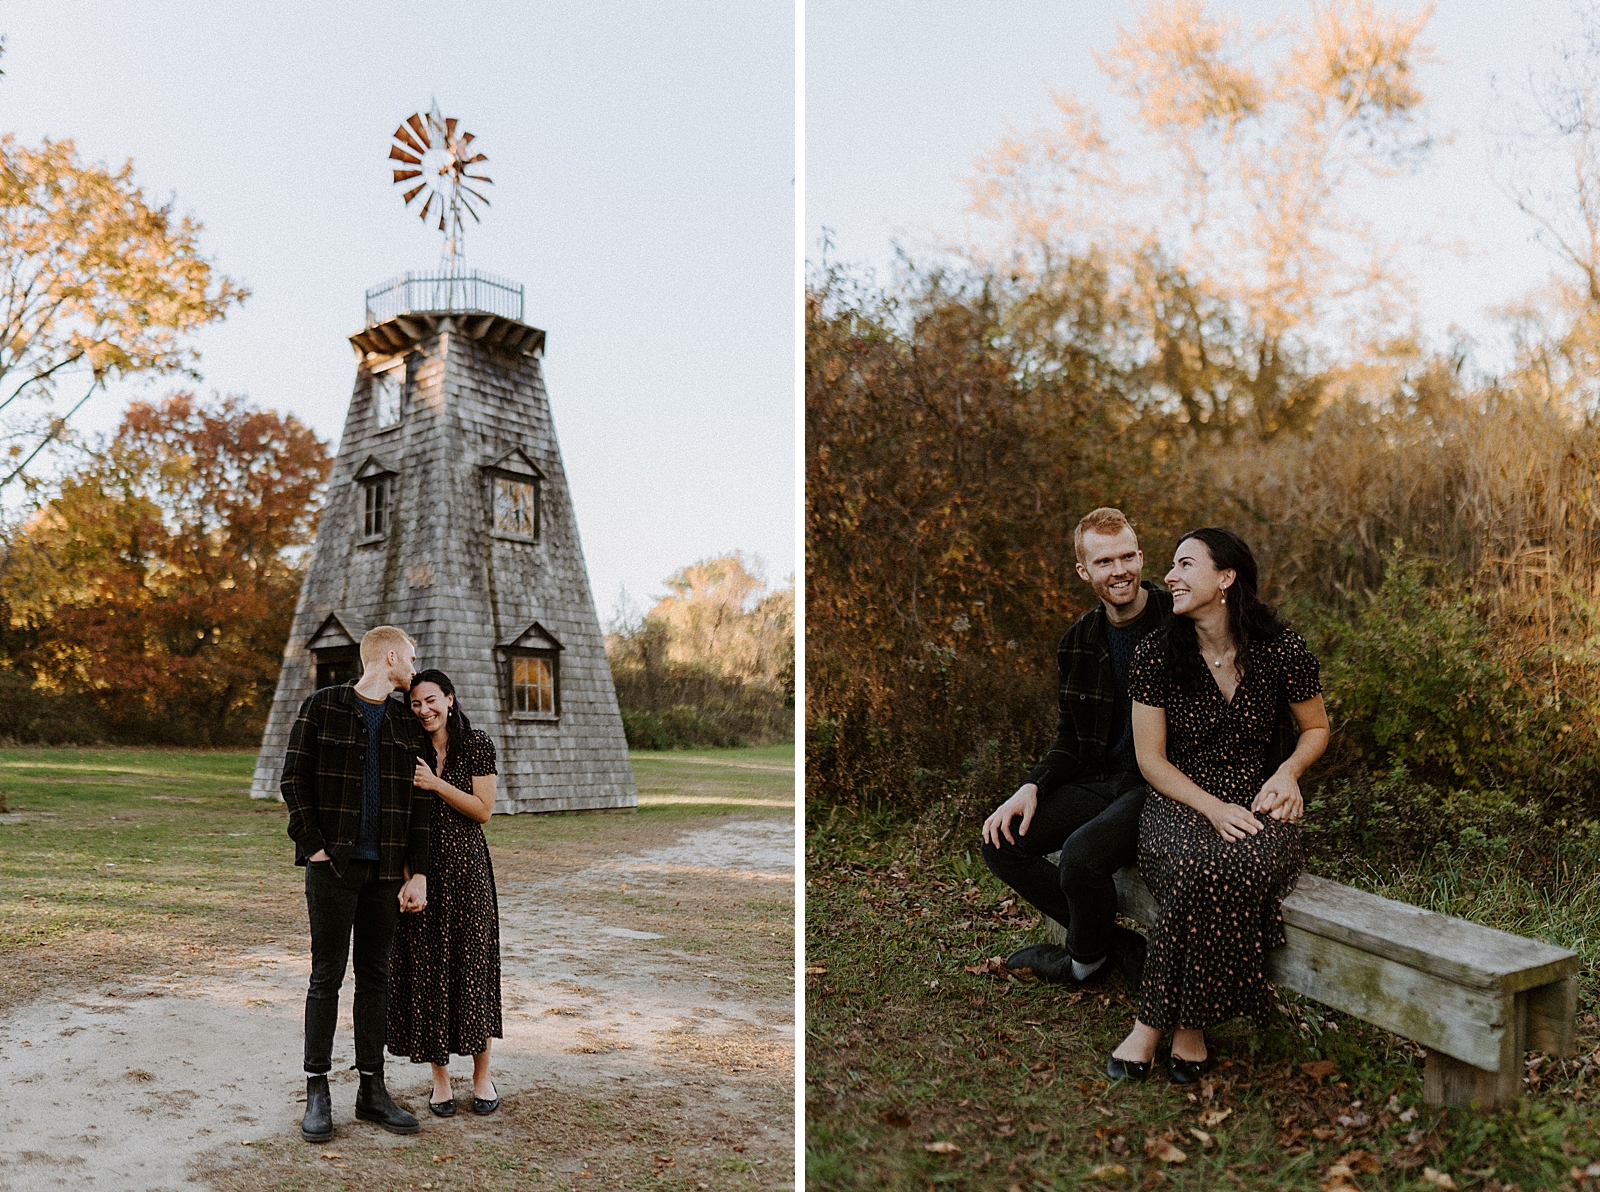 Couple standing together in front of rustic windmill